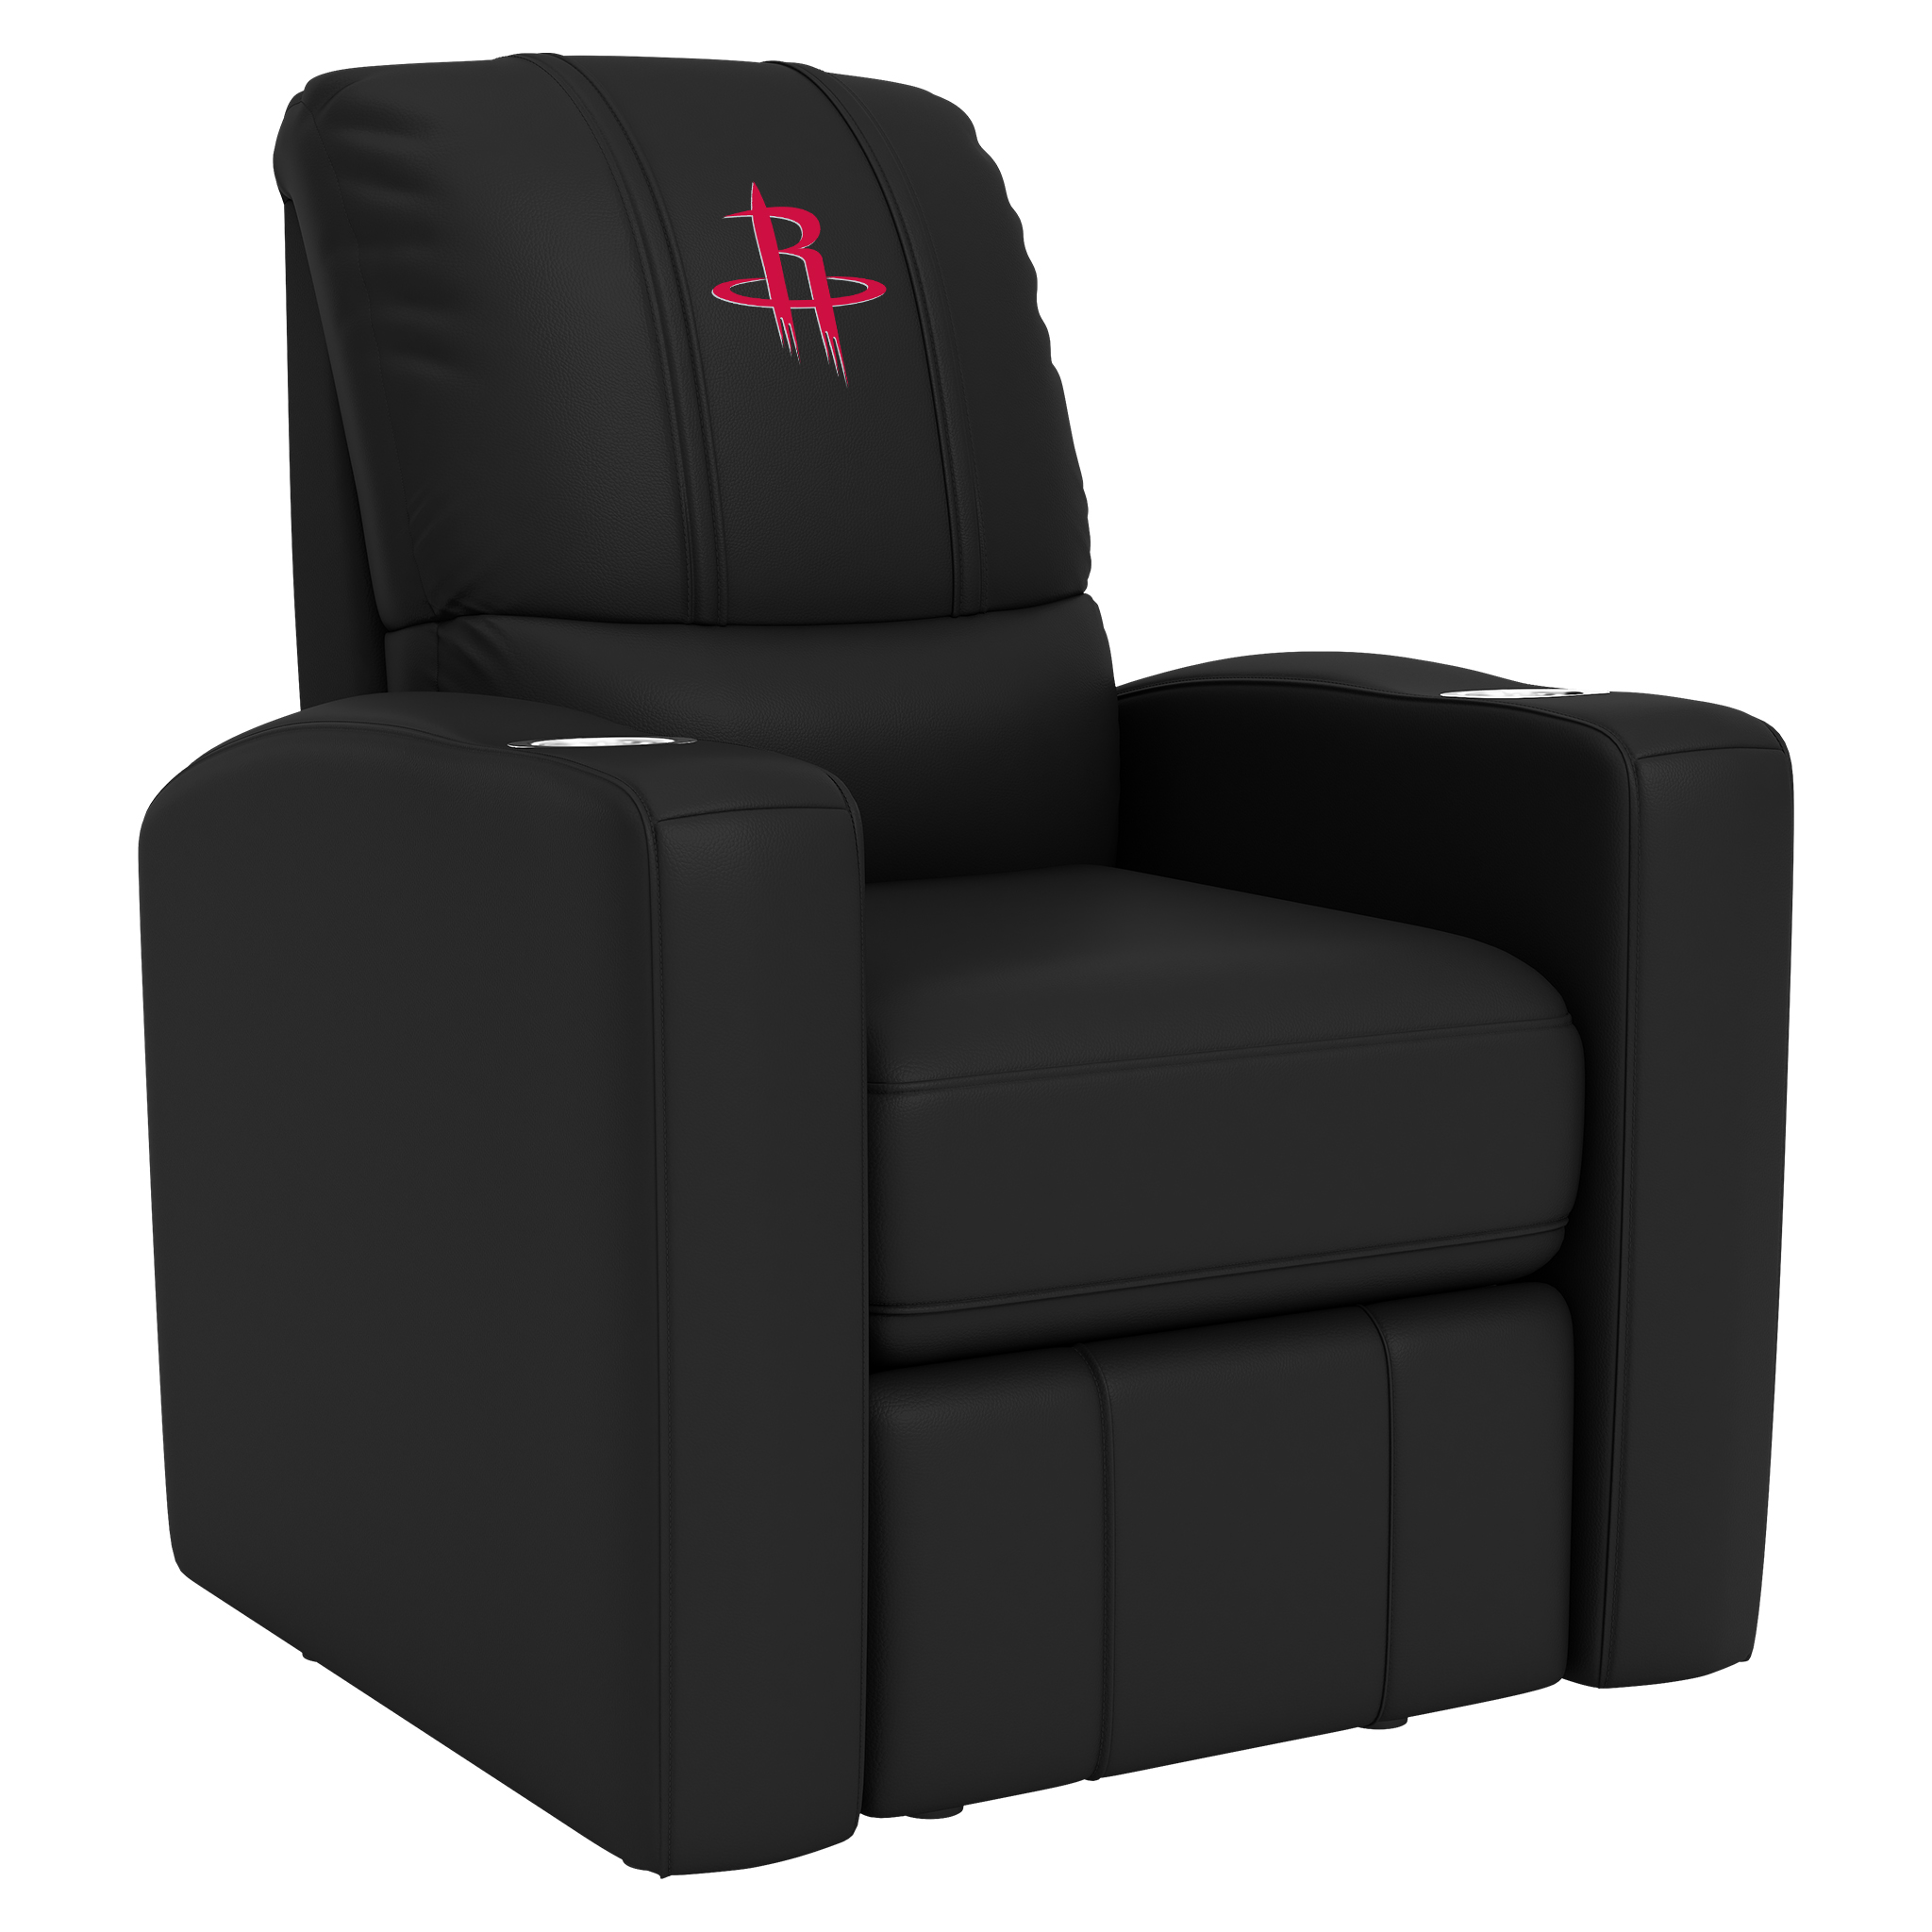 Houston Rockets Stealth Recliner with Houston Rockets Logo